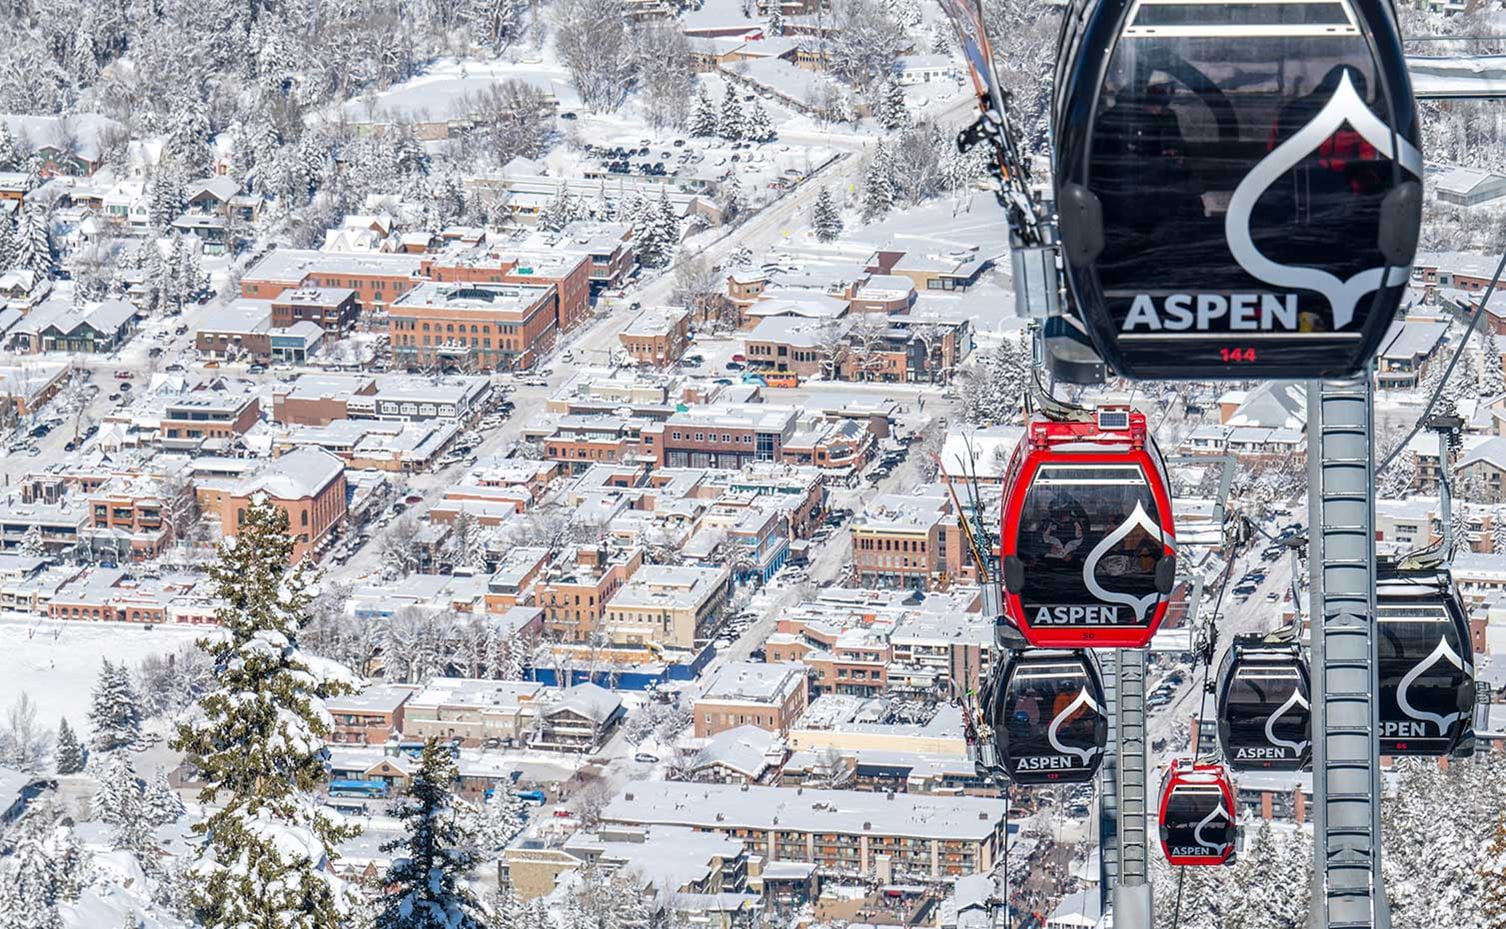 Gondola cars and the city of Aspen in winter